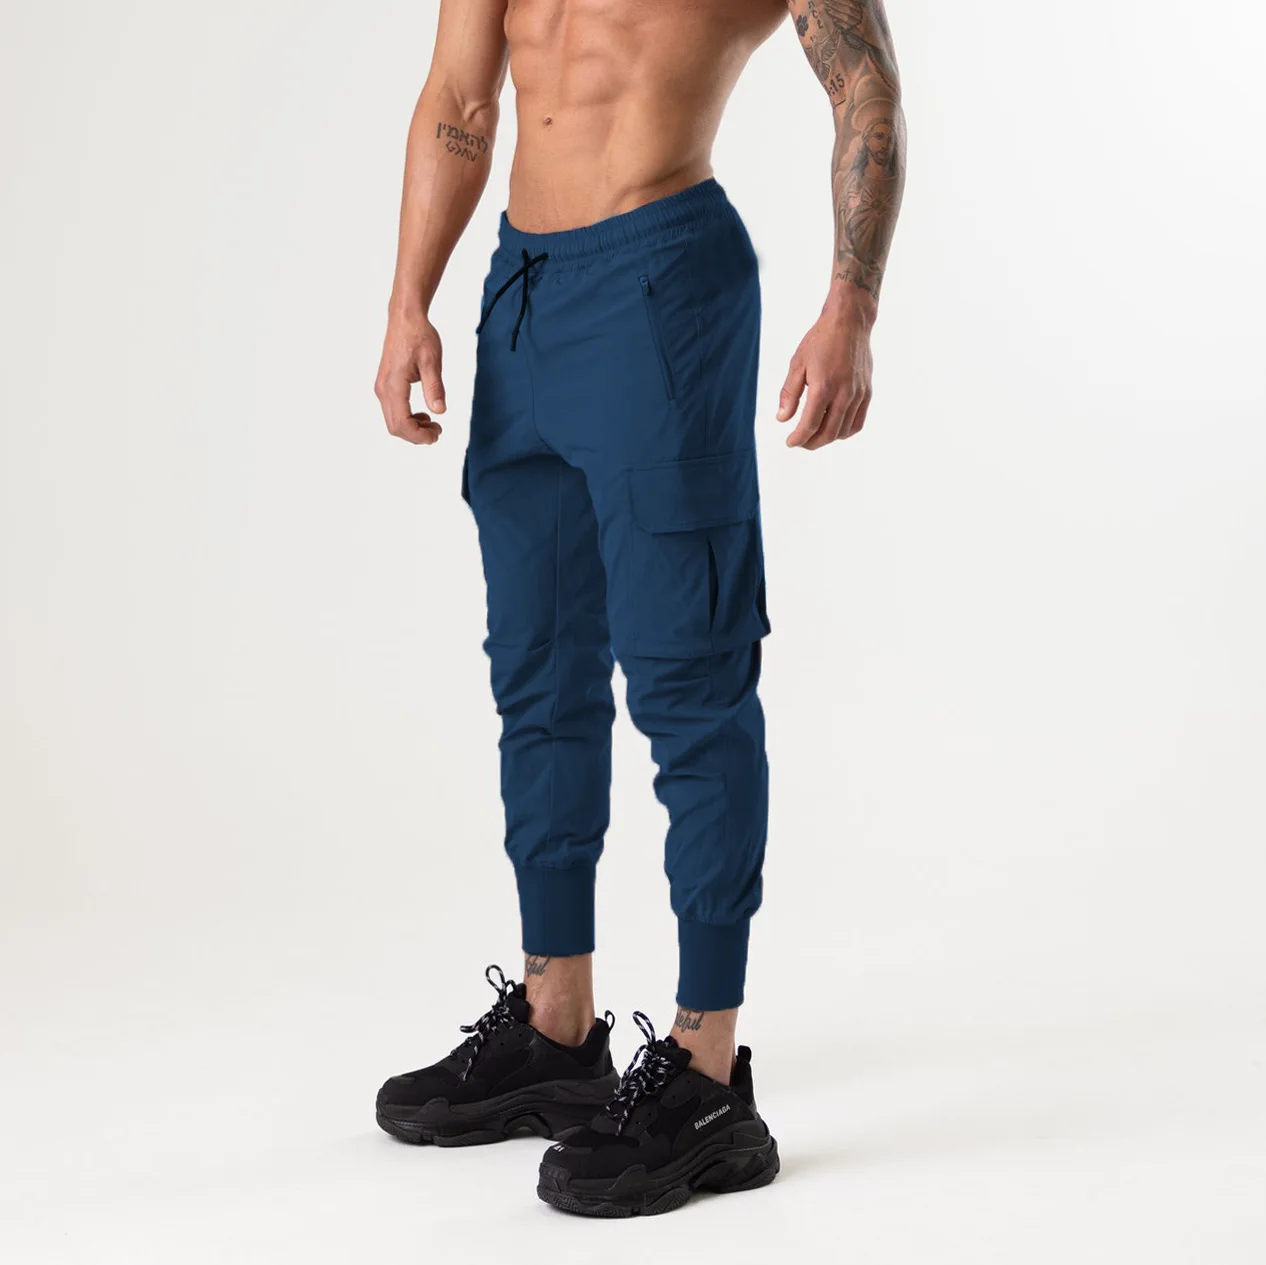 100% Original Six Pocket Joggers Style Trousers At Flat Rs.1000/-Availble  In retail And Wholesale Both, Call Or Whats App For… | Instagram